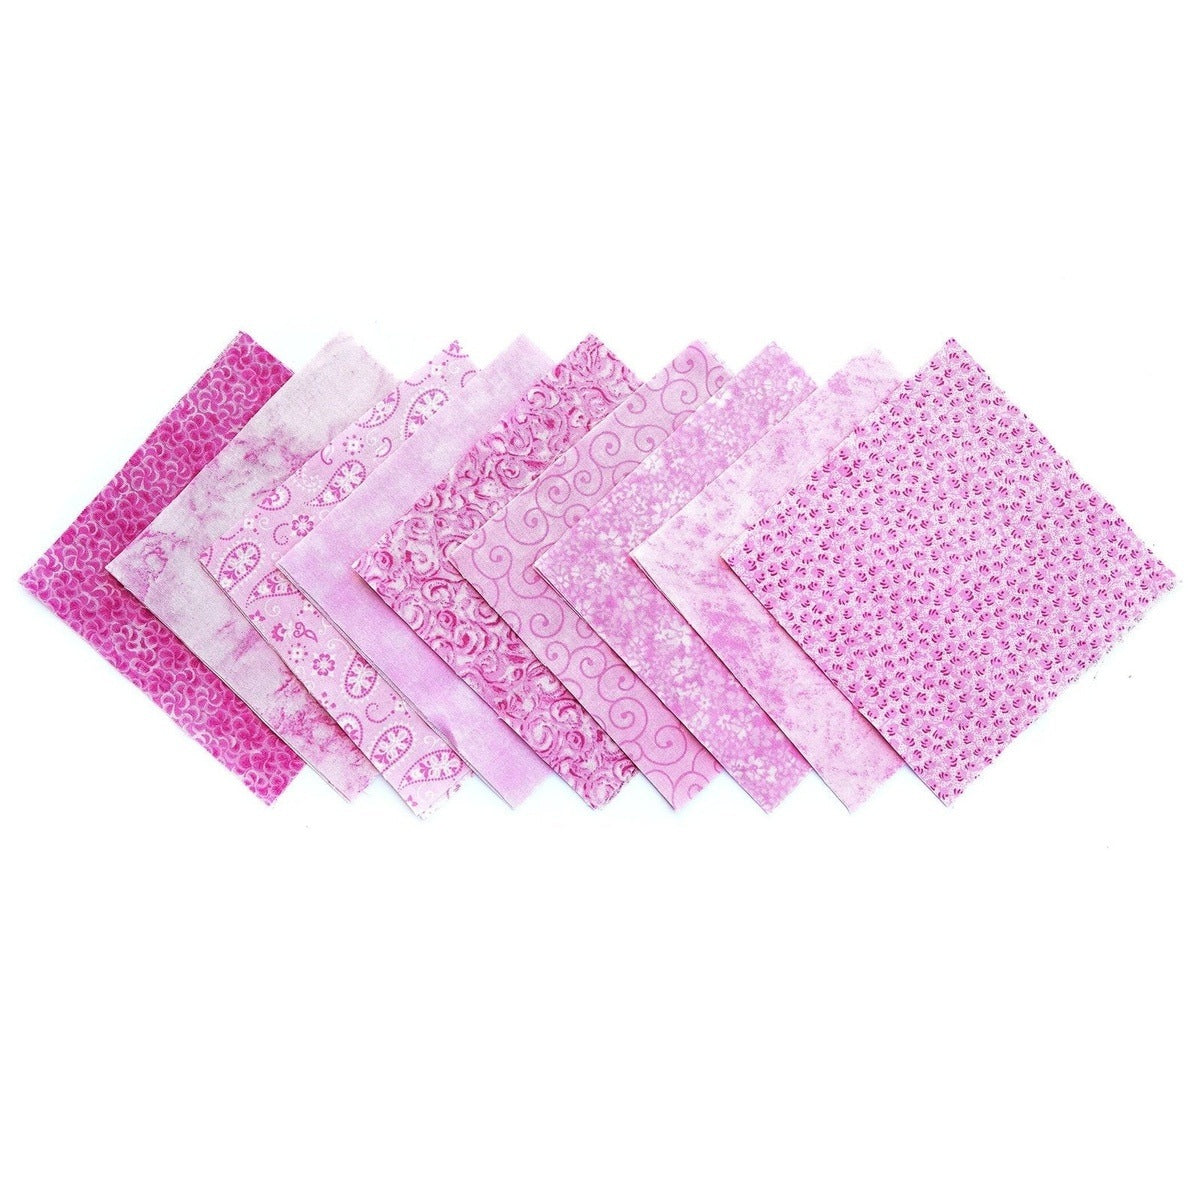 It's All Pink 90-piece pre-cut charm pack 5" squares 100% cotton fabric quilt Pink tone-on-tone